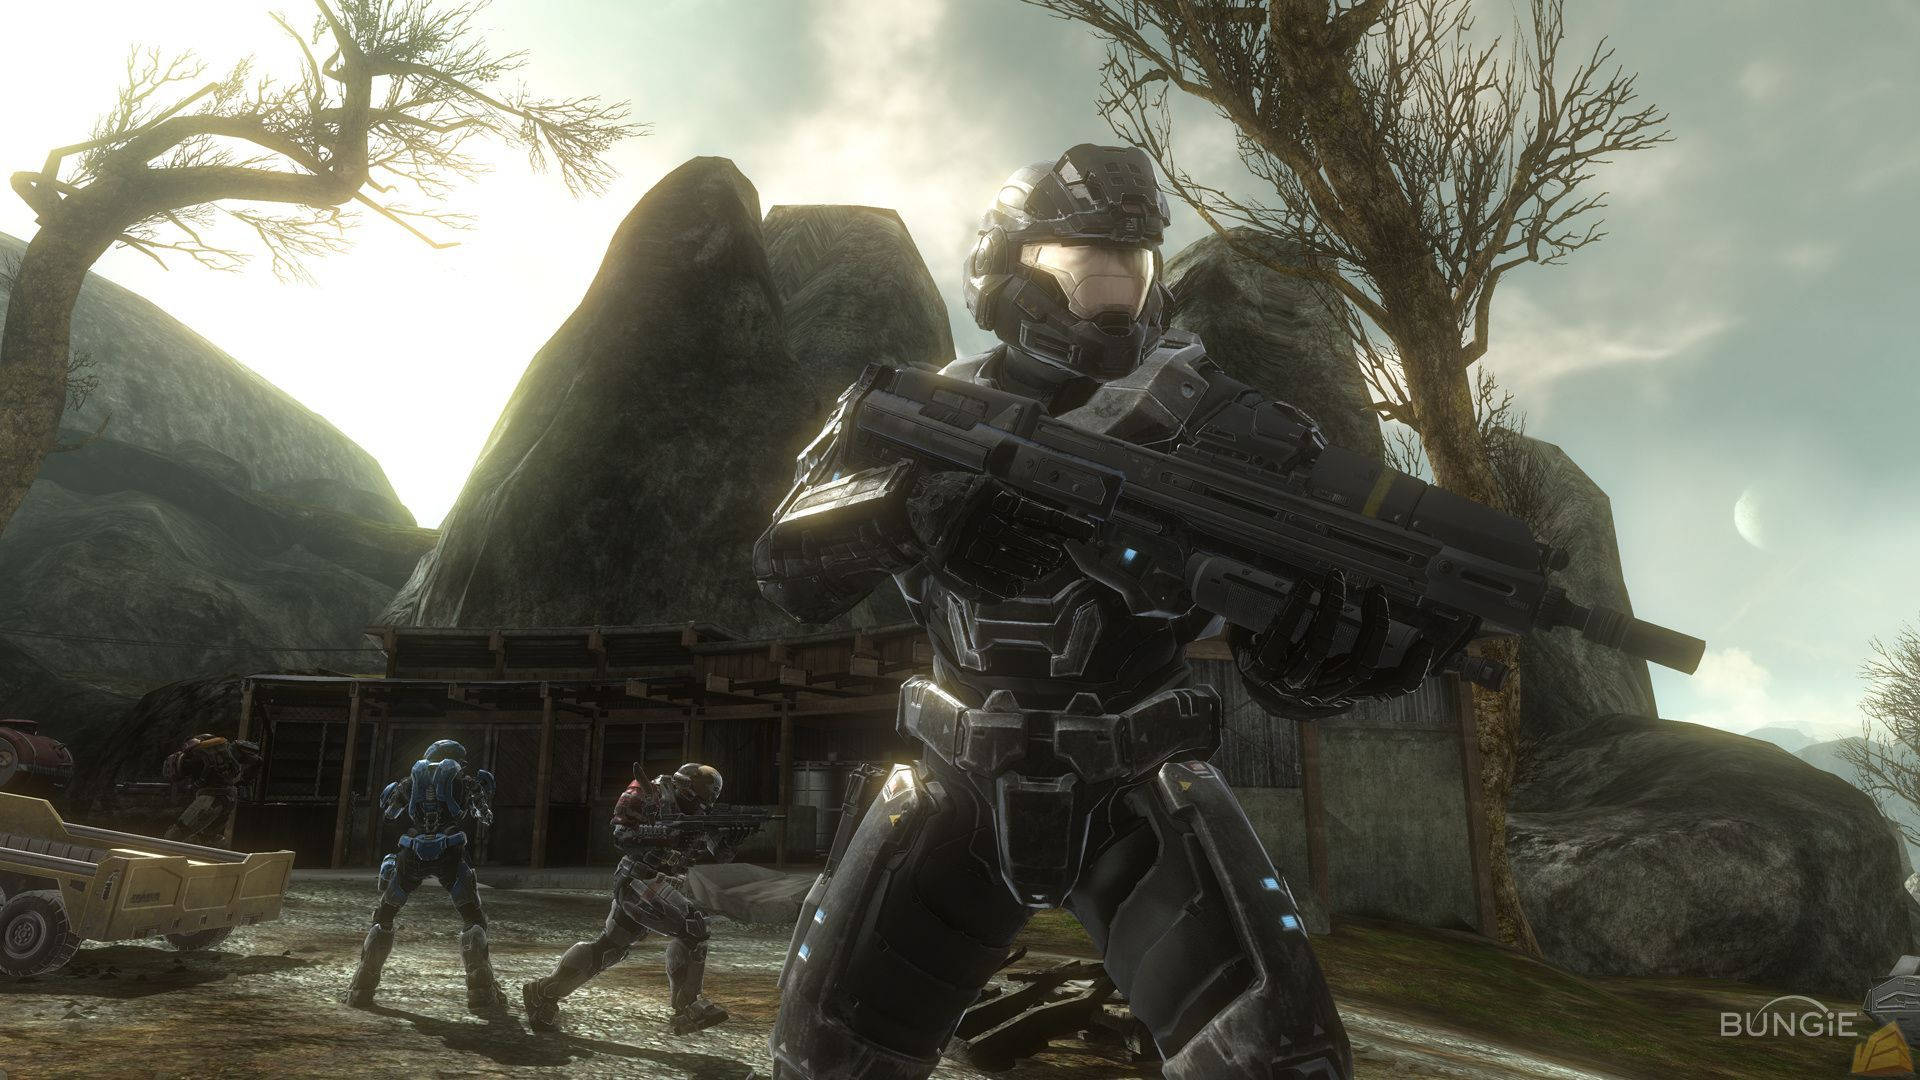 Halo Reach 1920X1080 Wallpaper and Background Image